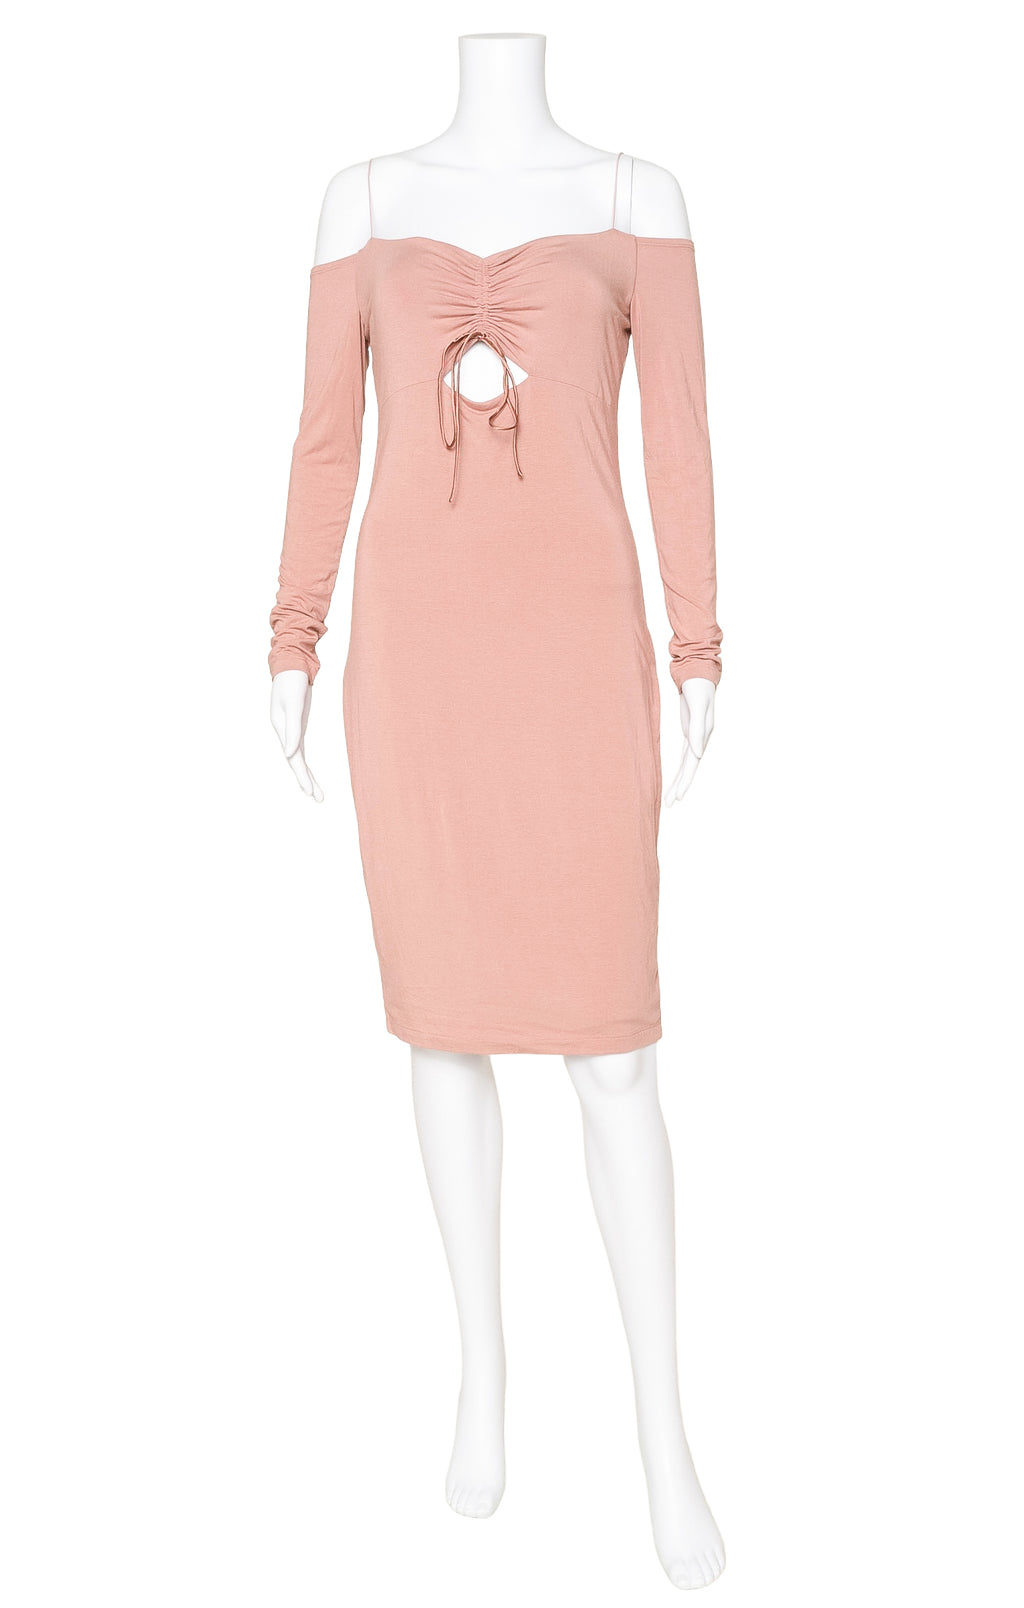 T BY ALEXANDER WANG (NEW) with tags Dress Size: M